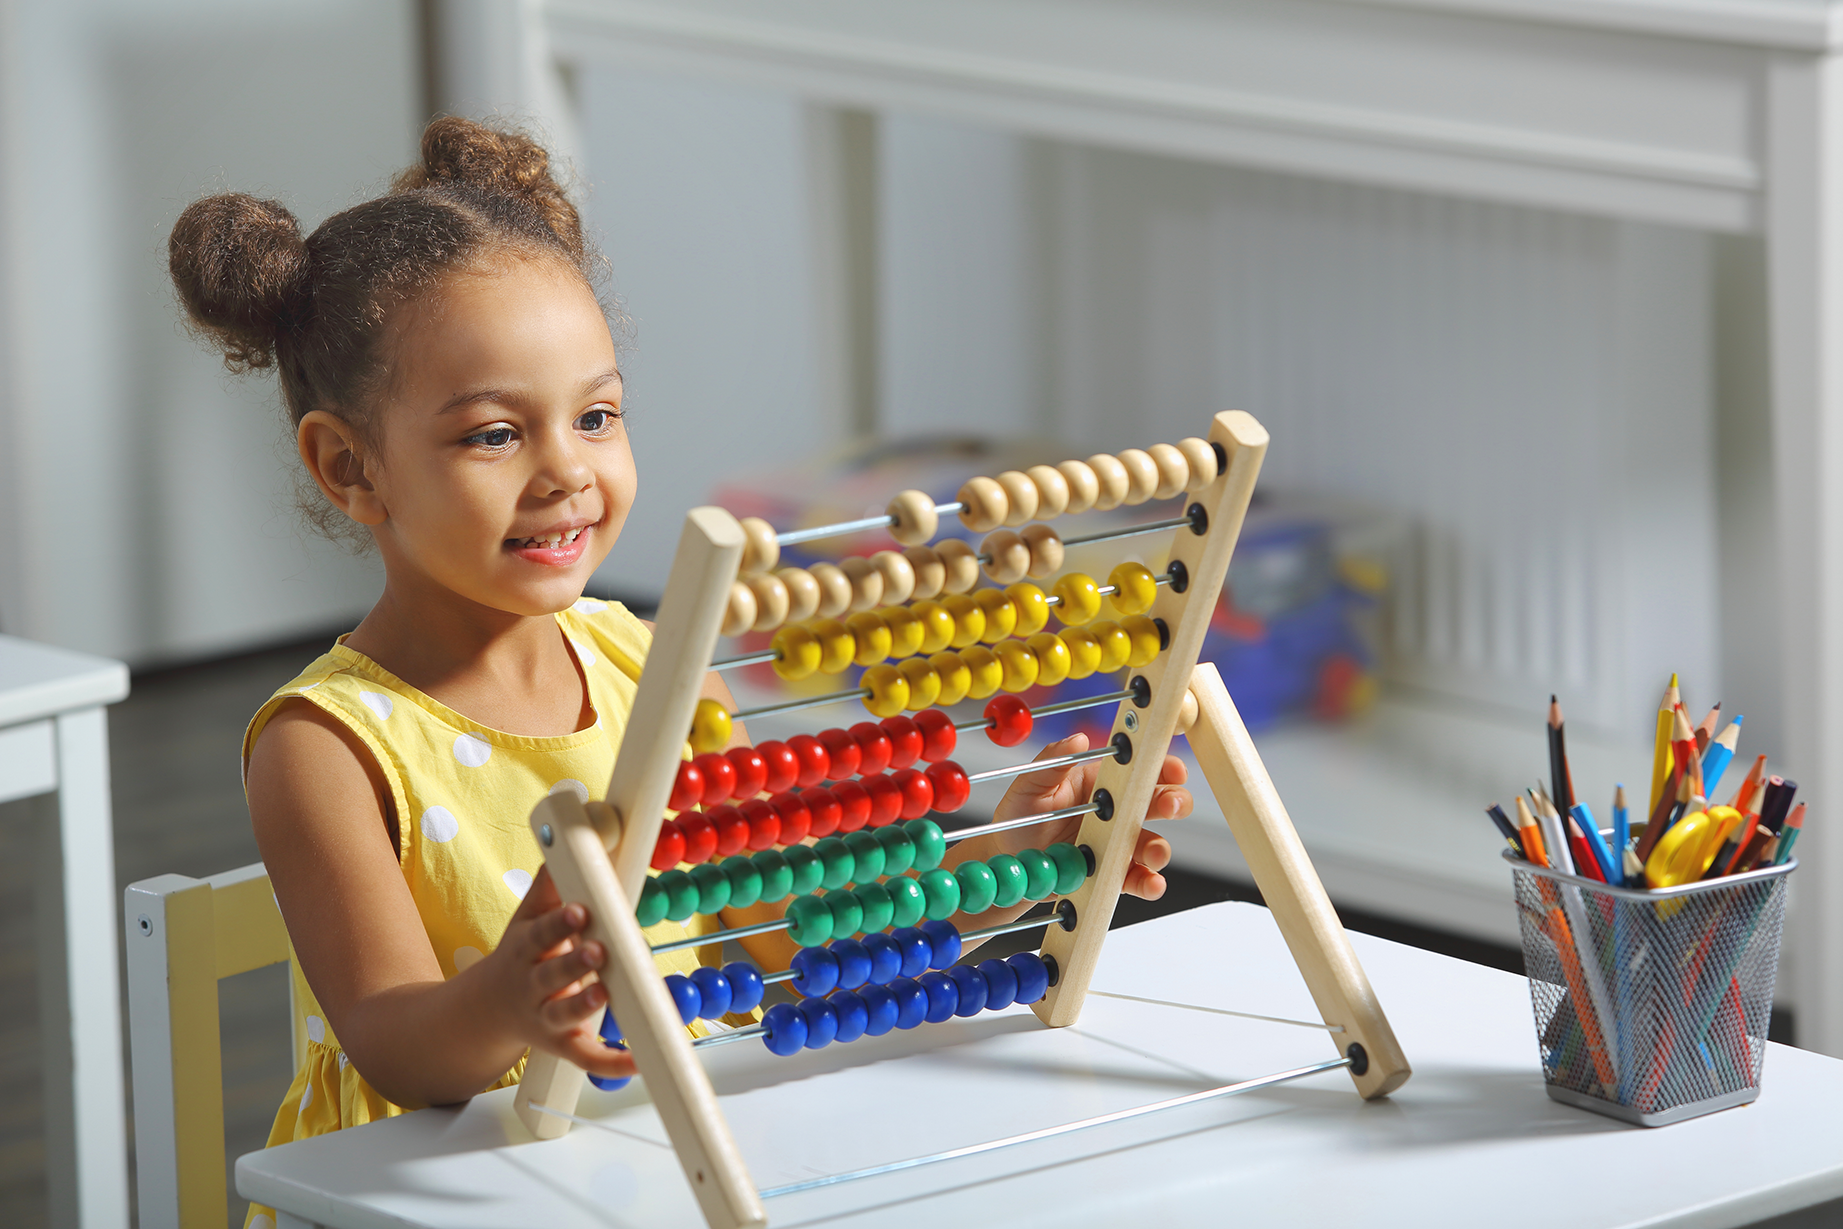 Educational toys for learning in early childhood